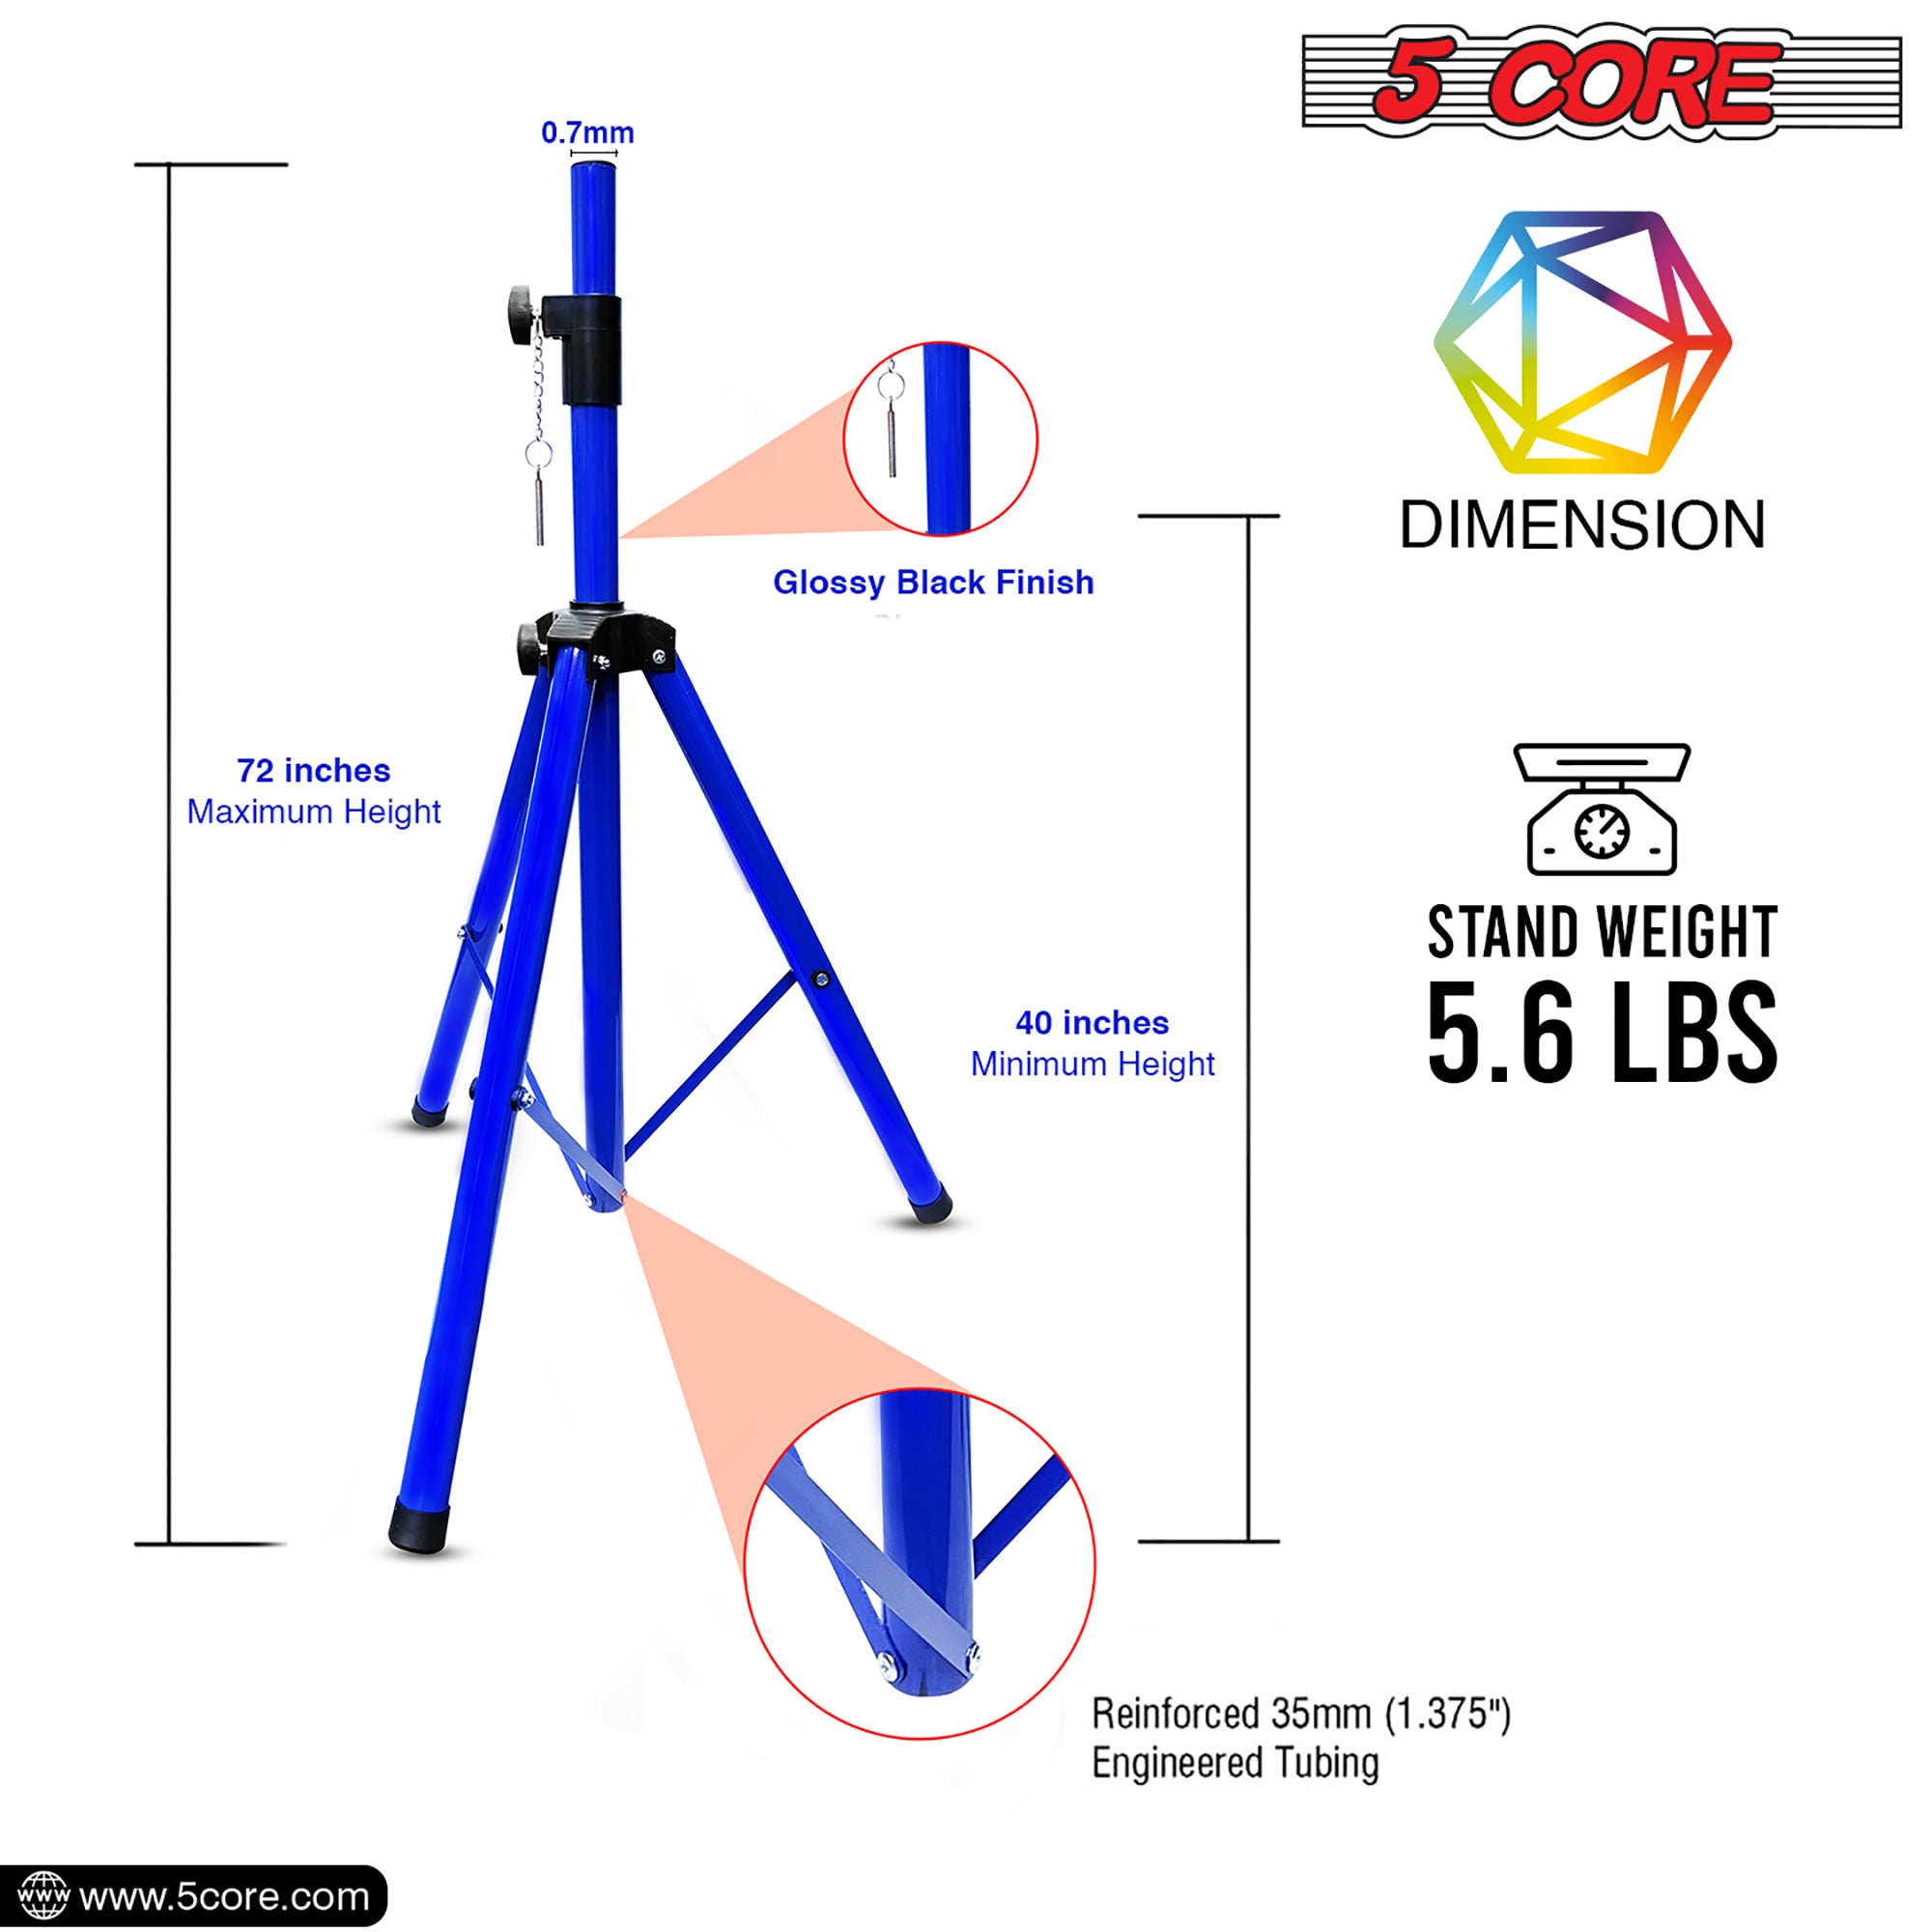 5 Core Speakers Stands 1 Piece Blue Heavy Duty Height Adjustable Tripod PA Speaker Stand For Large Speakers DJ Stand Para Bocinas Includes Carry Bag- SS HD 1 PK BLU